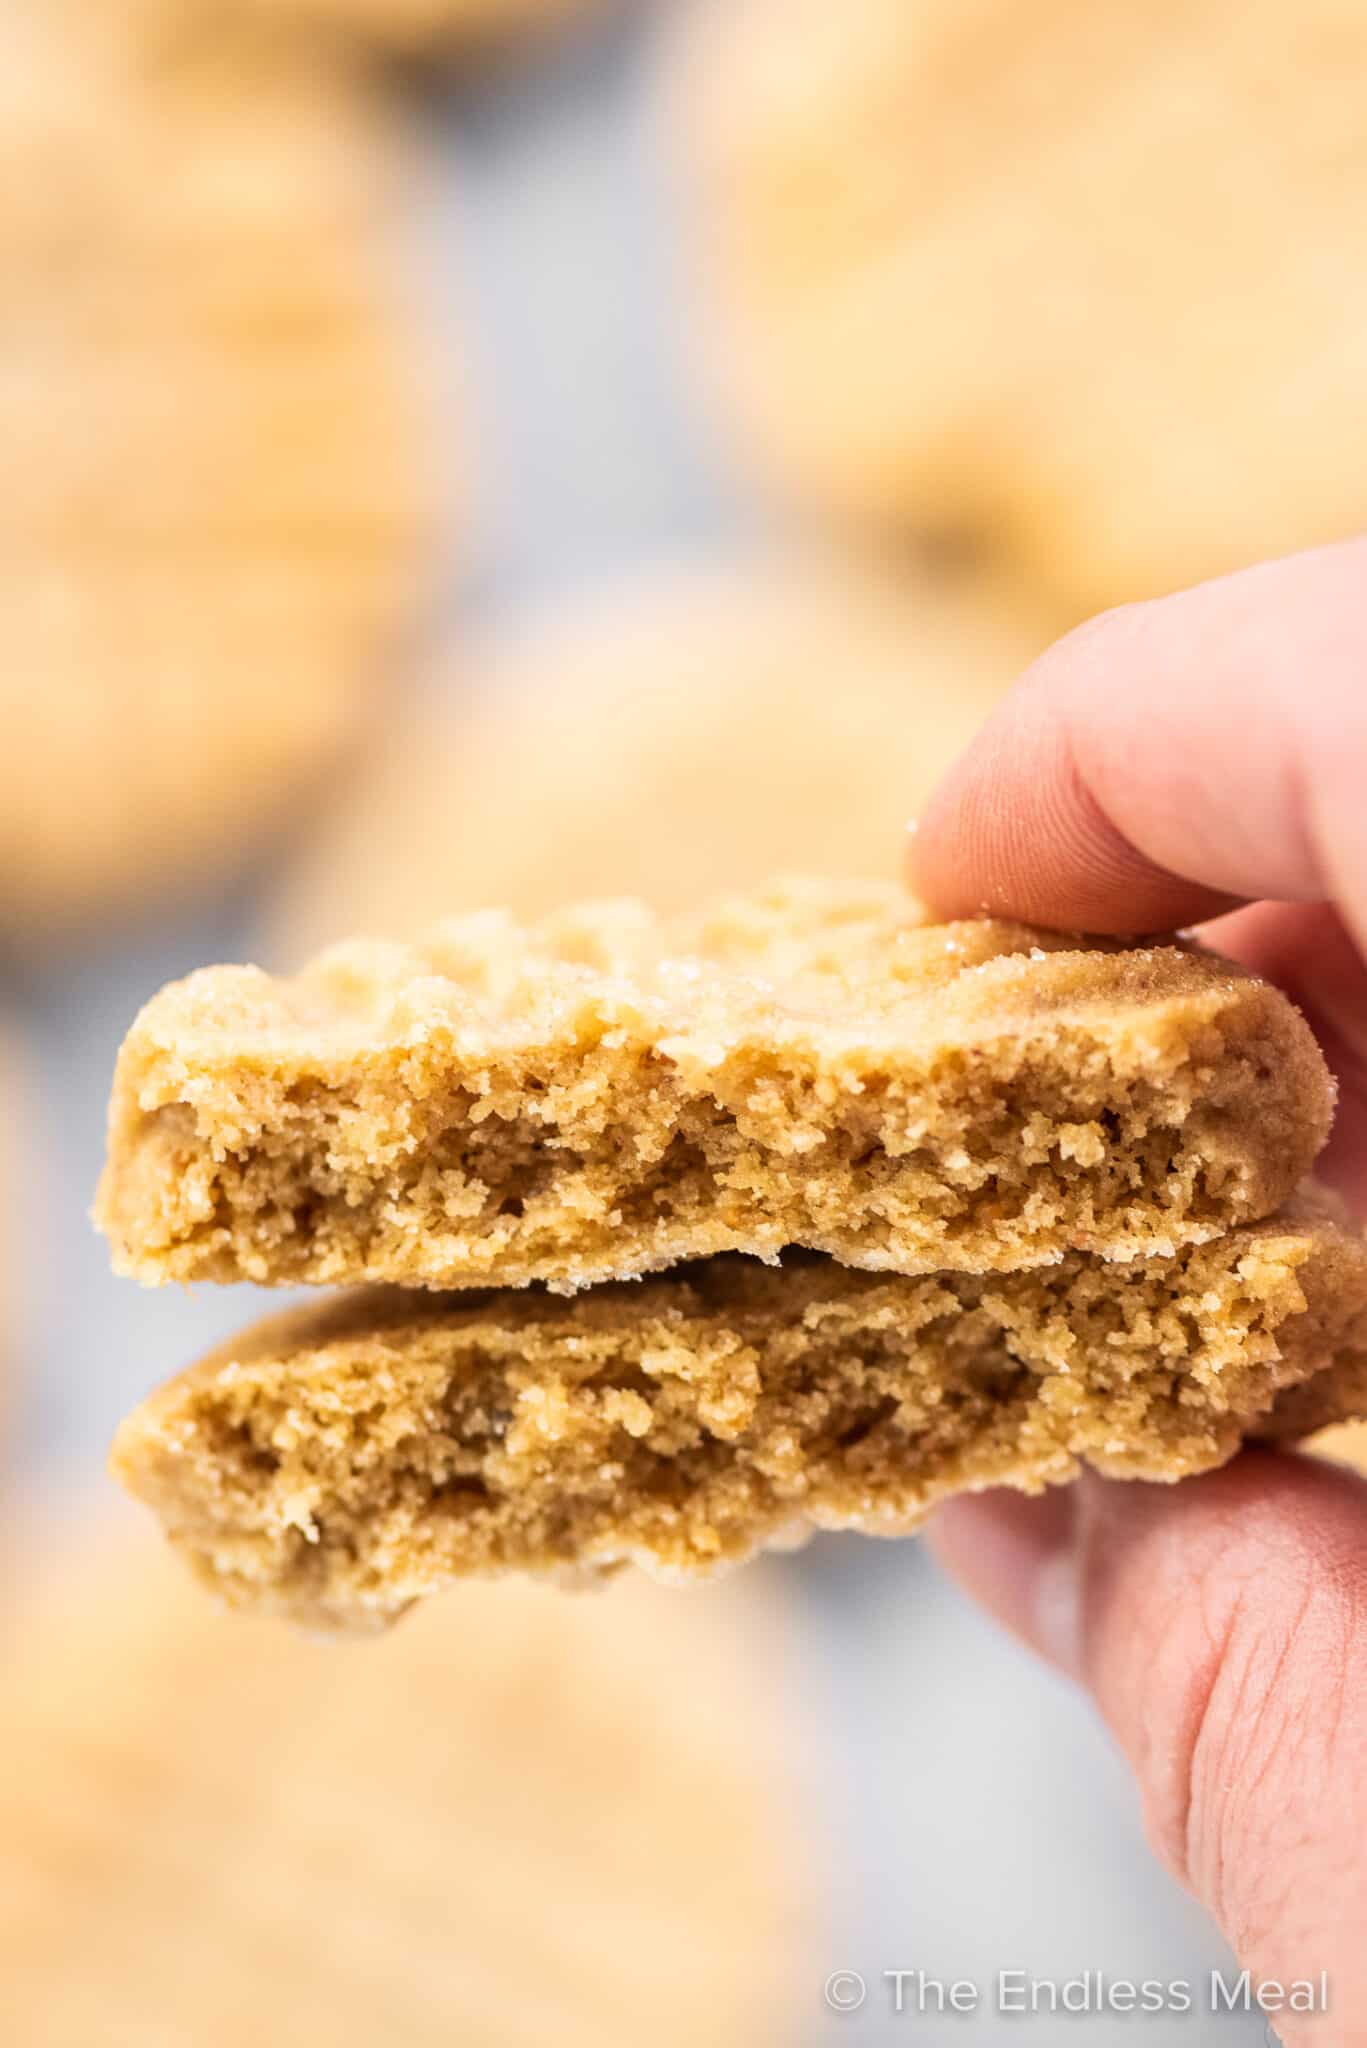 A hand holding two halves of a peanut butter cookies.